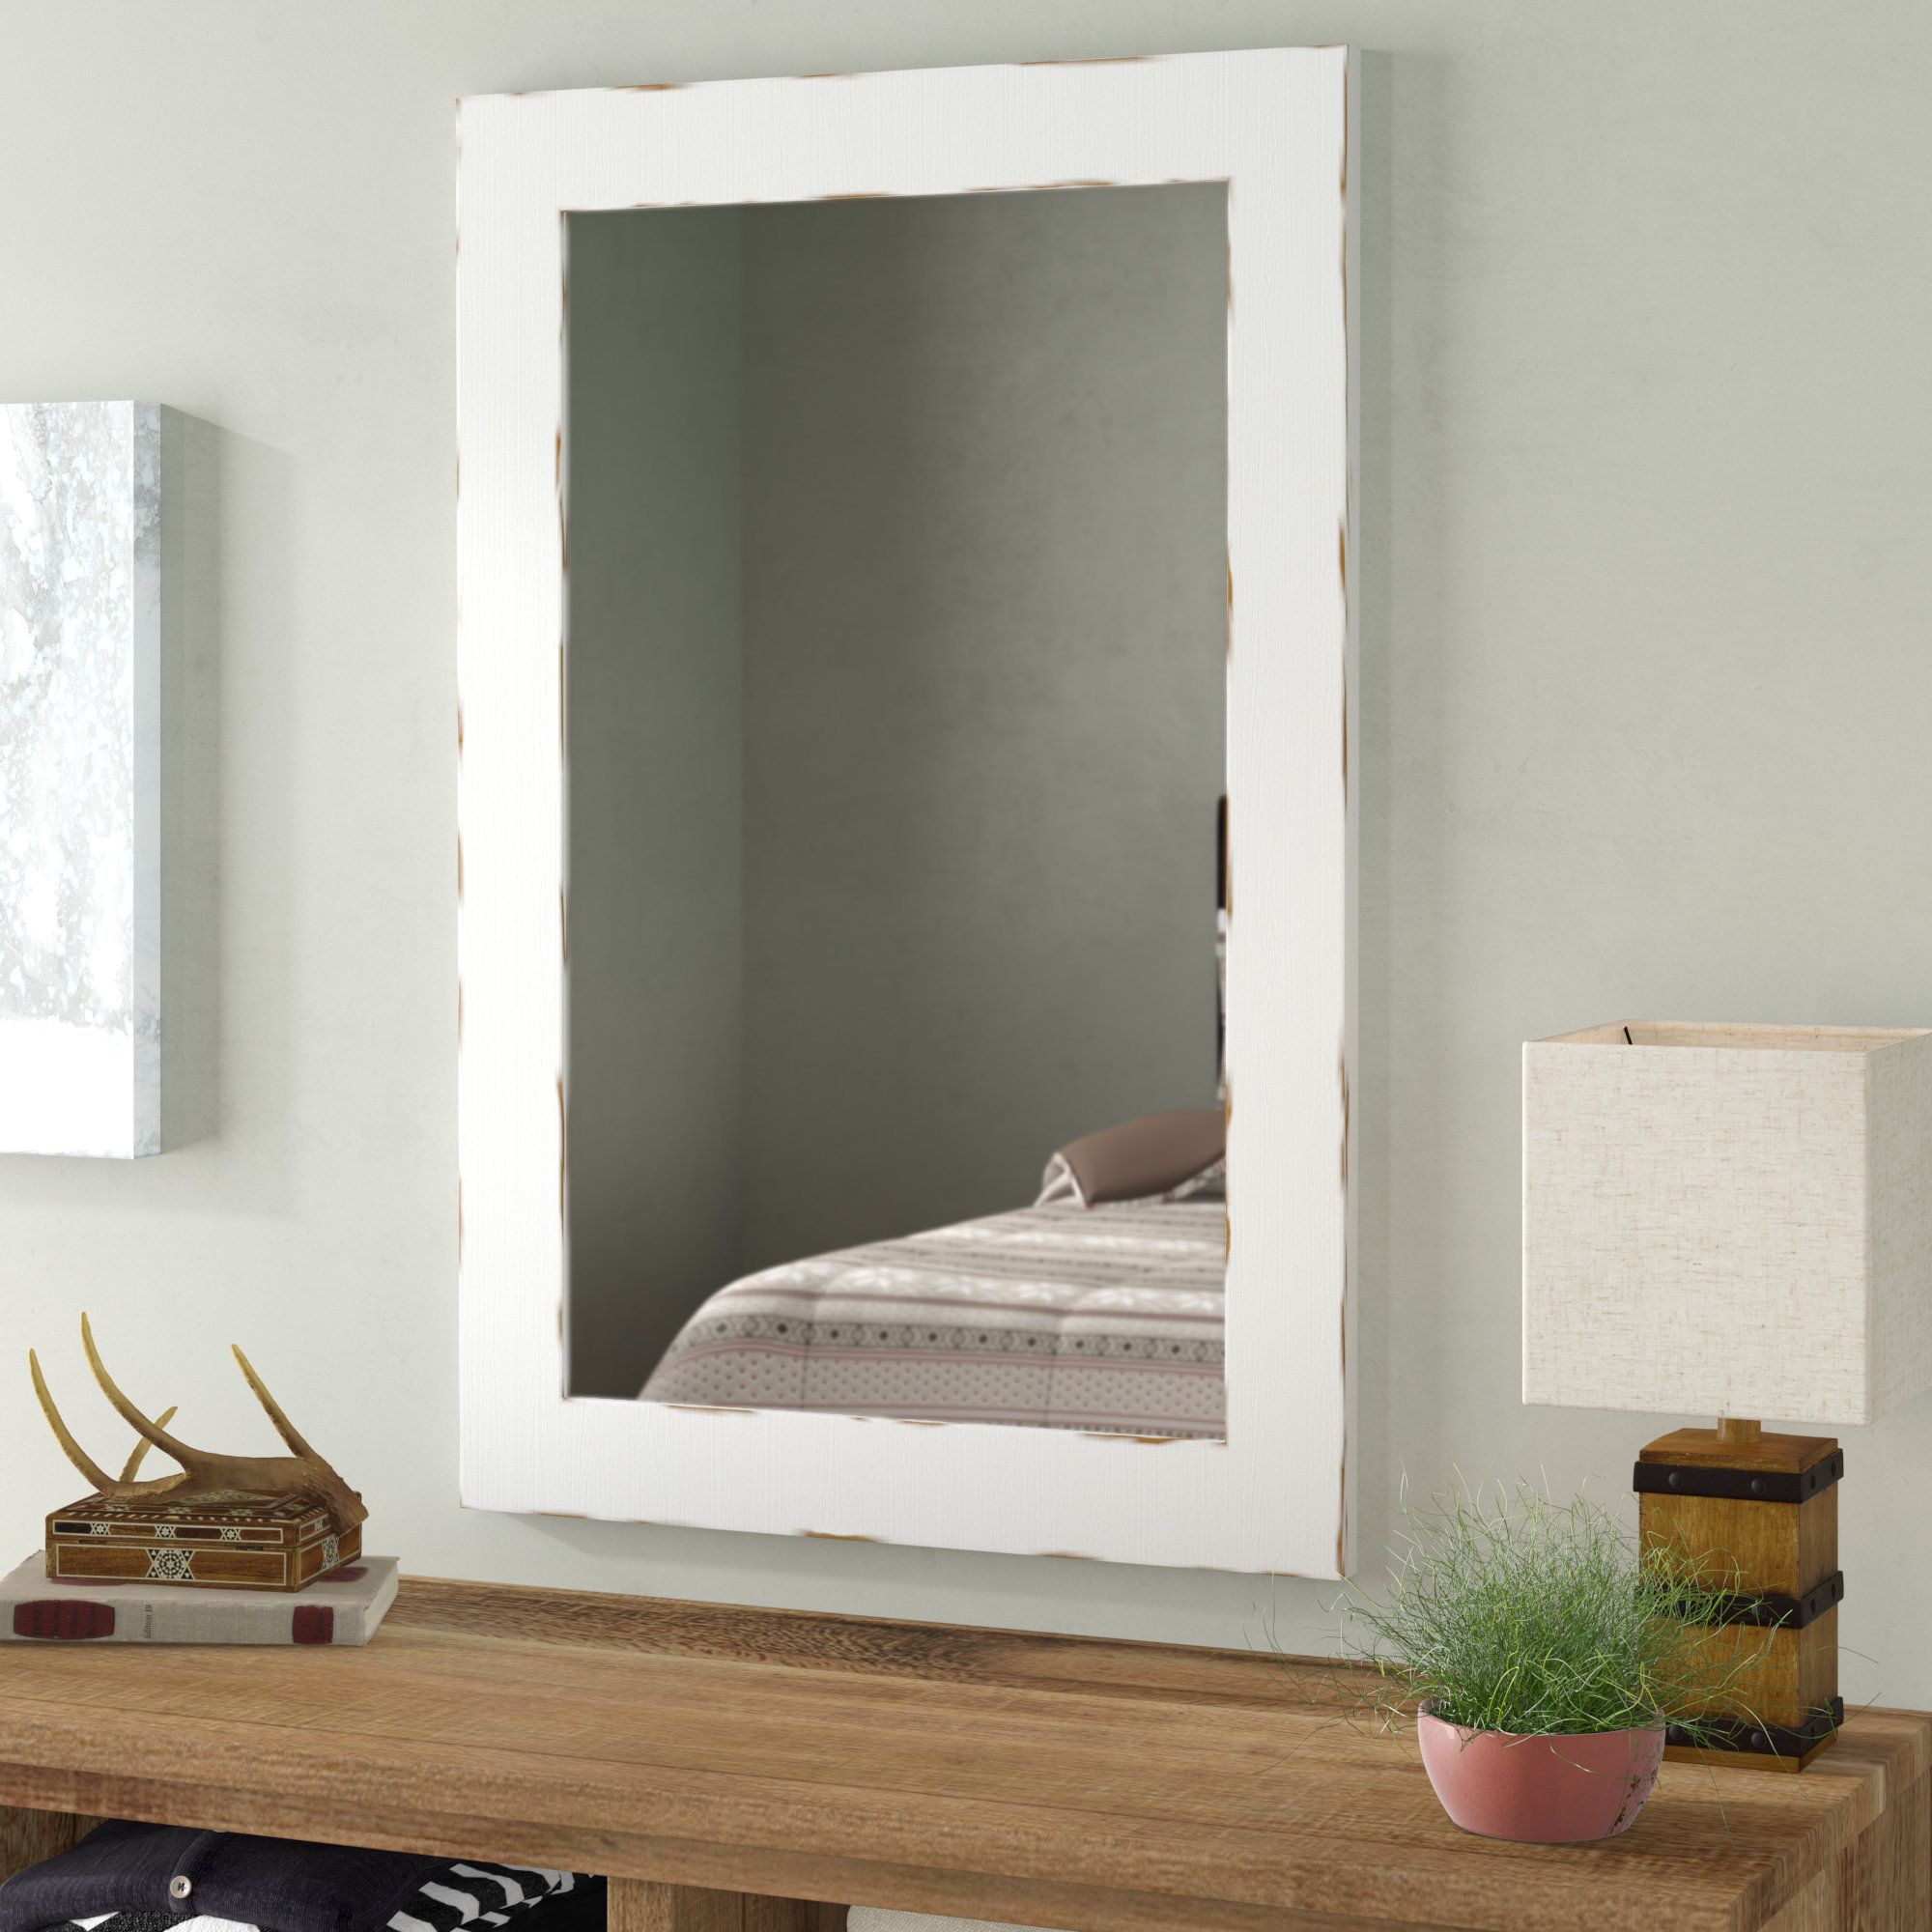 Union Rustic Longwood Rustic Beveled Accent Mirror & Reviews Regarding Longwood Rustic Beveled Accent Mirrors (View 1 of 30)